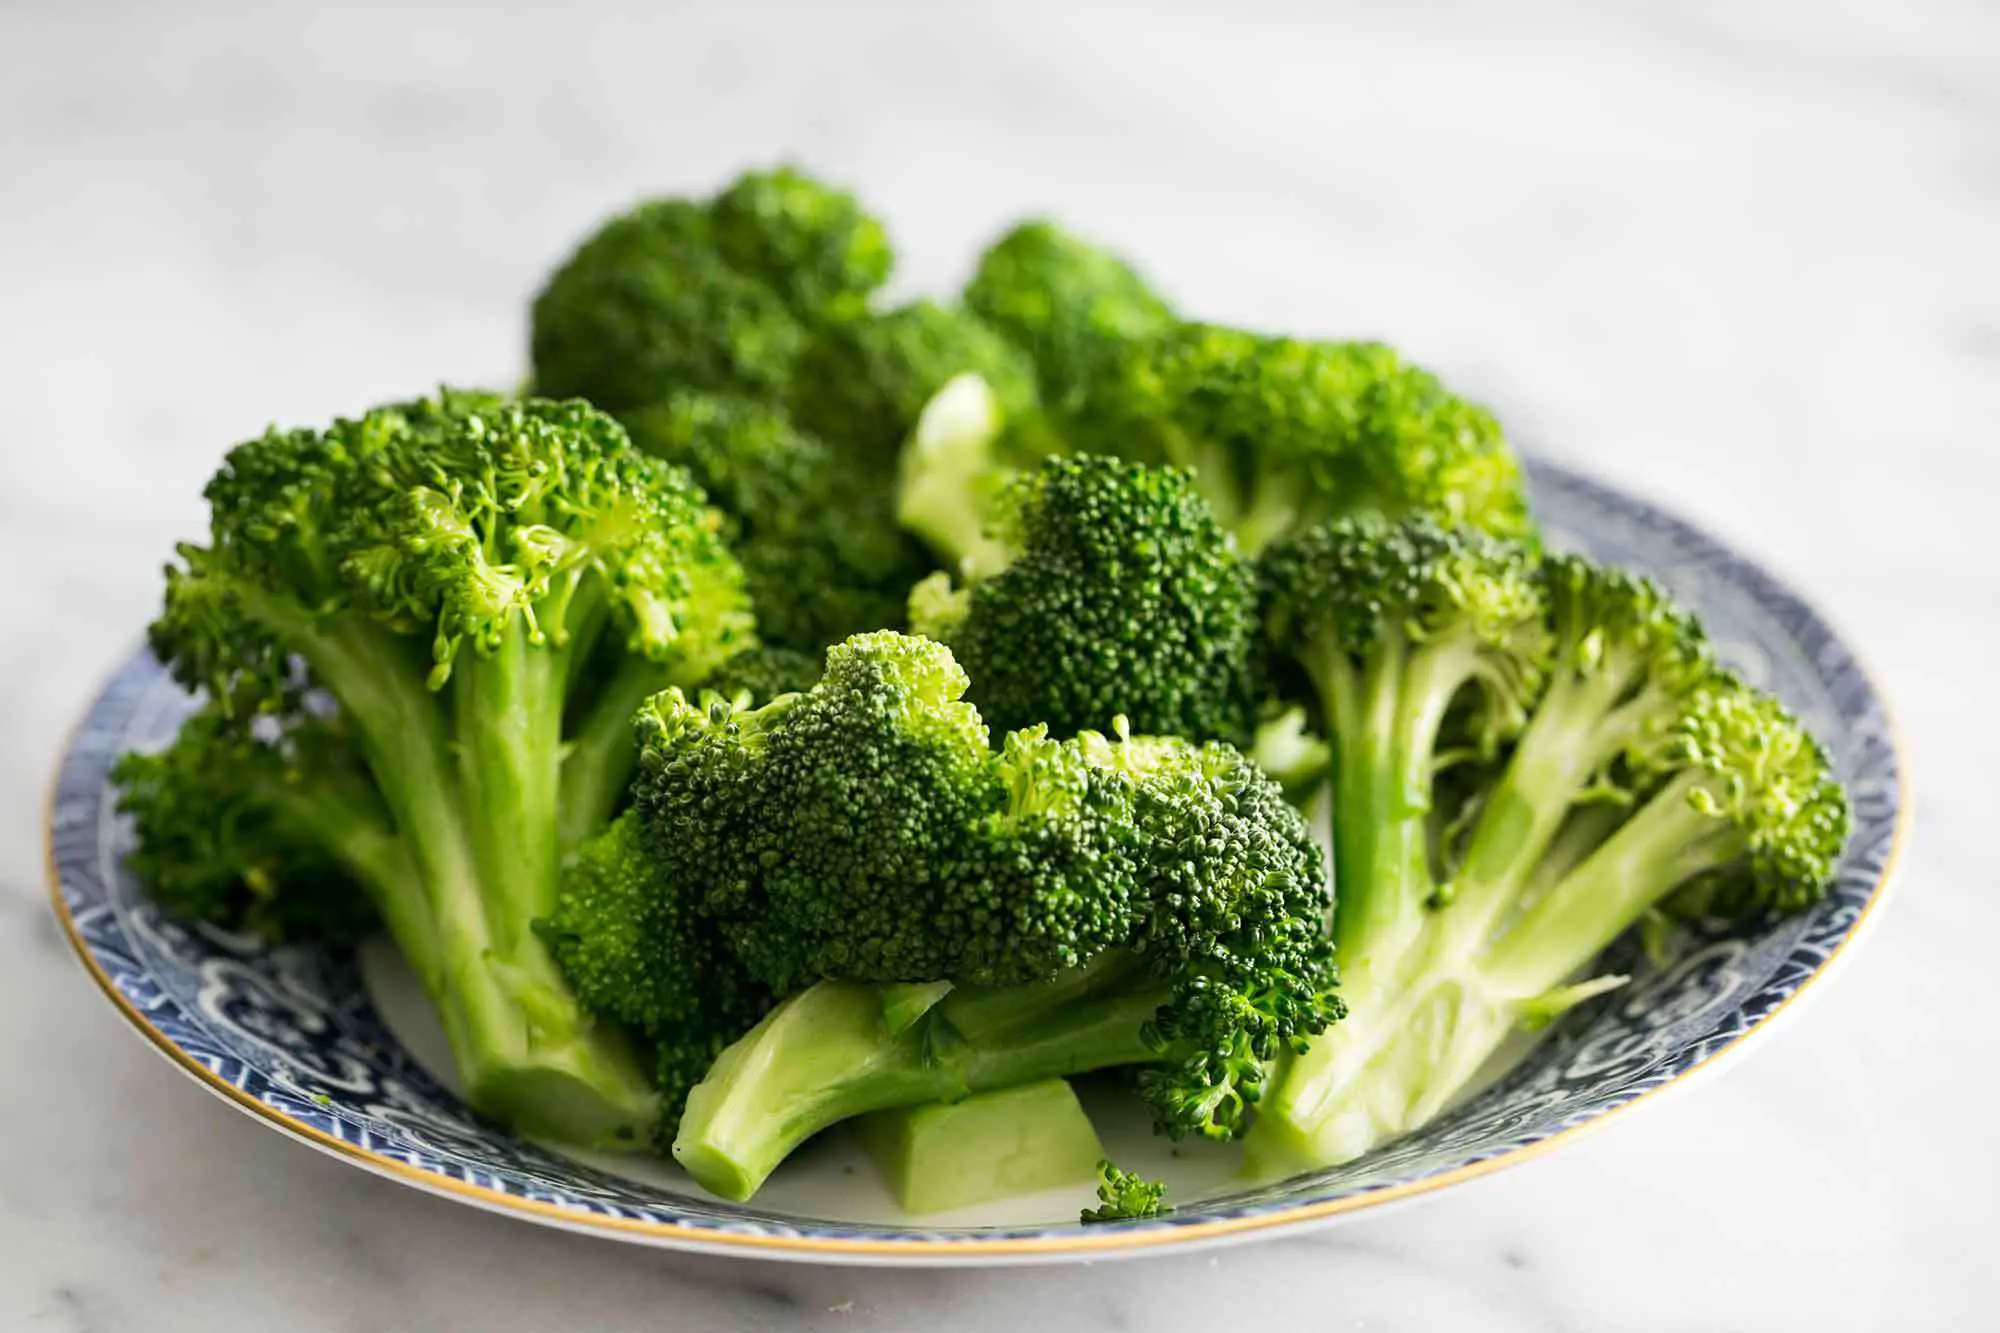 How to steam broccoli: 7 Easy Steps to Follow